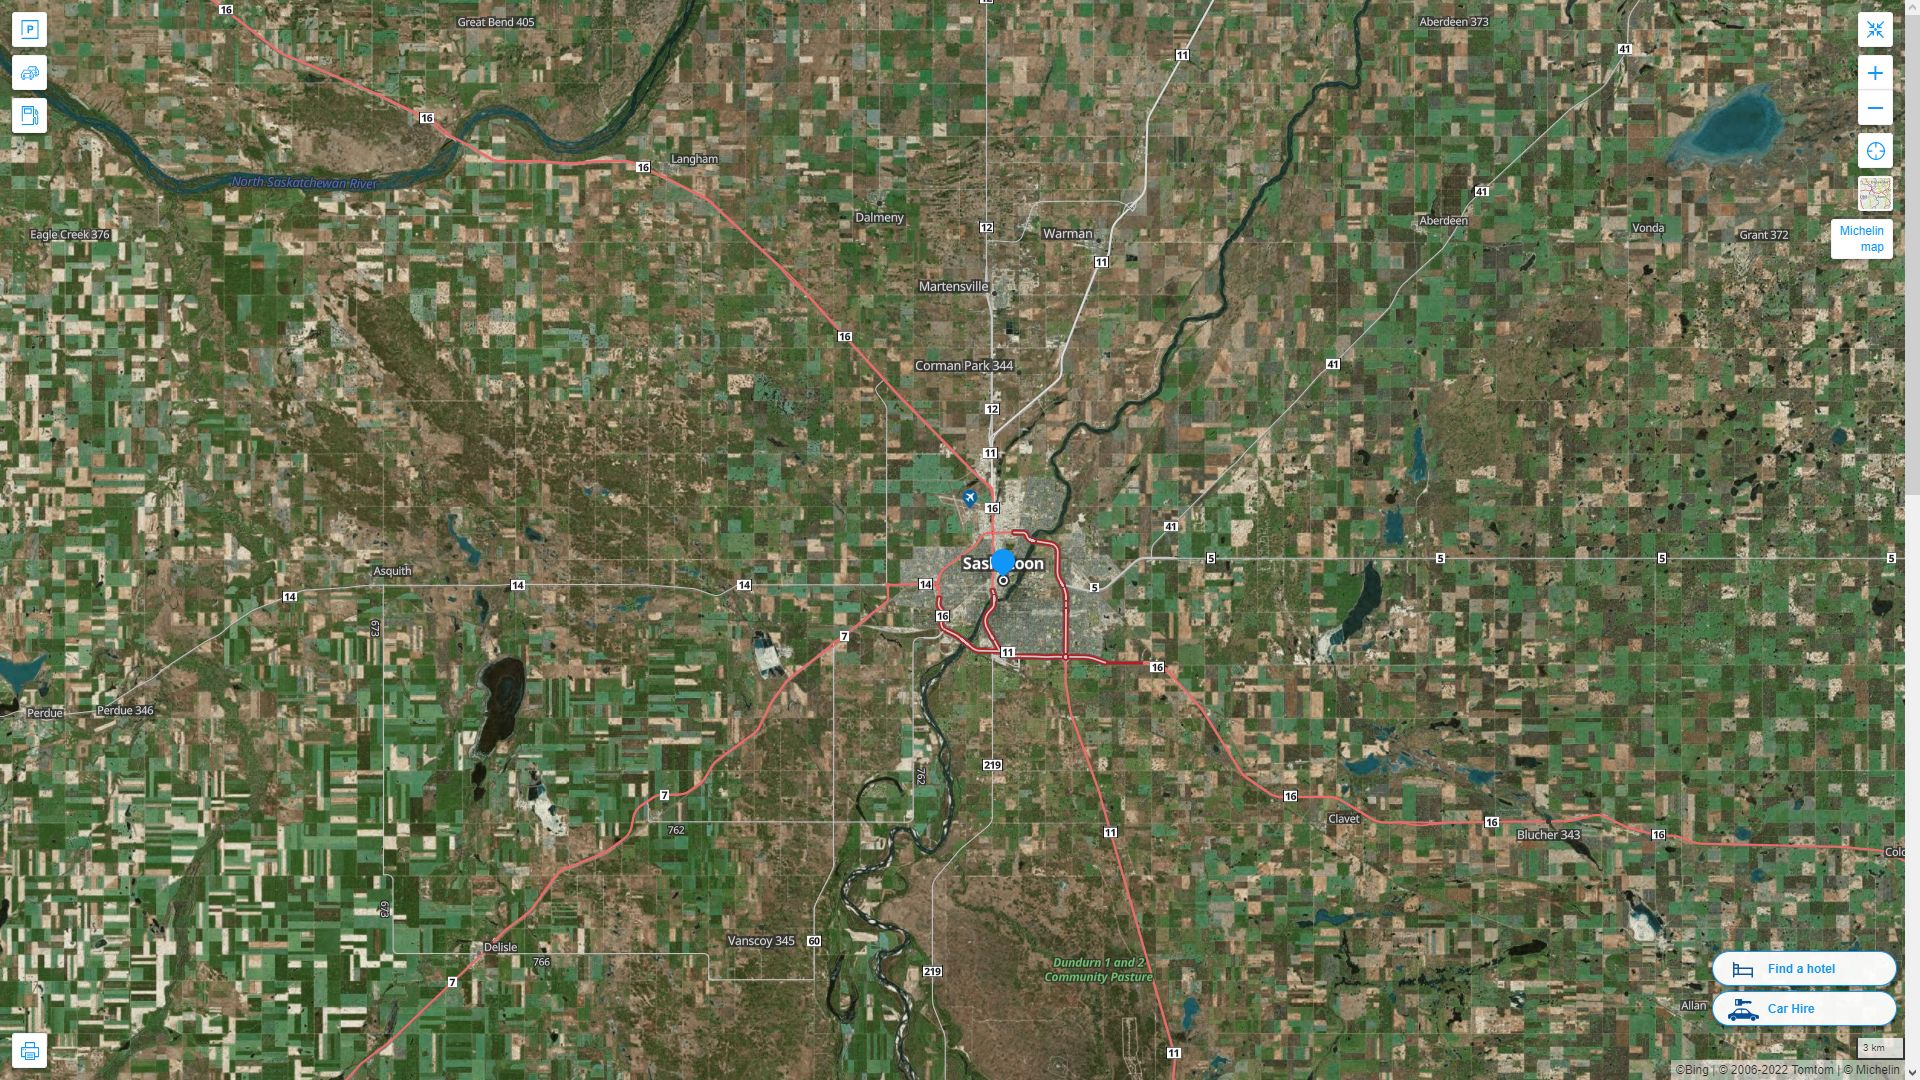 Saskatoon Highway and Road Map with Satellite View